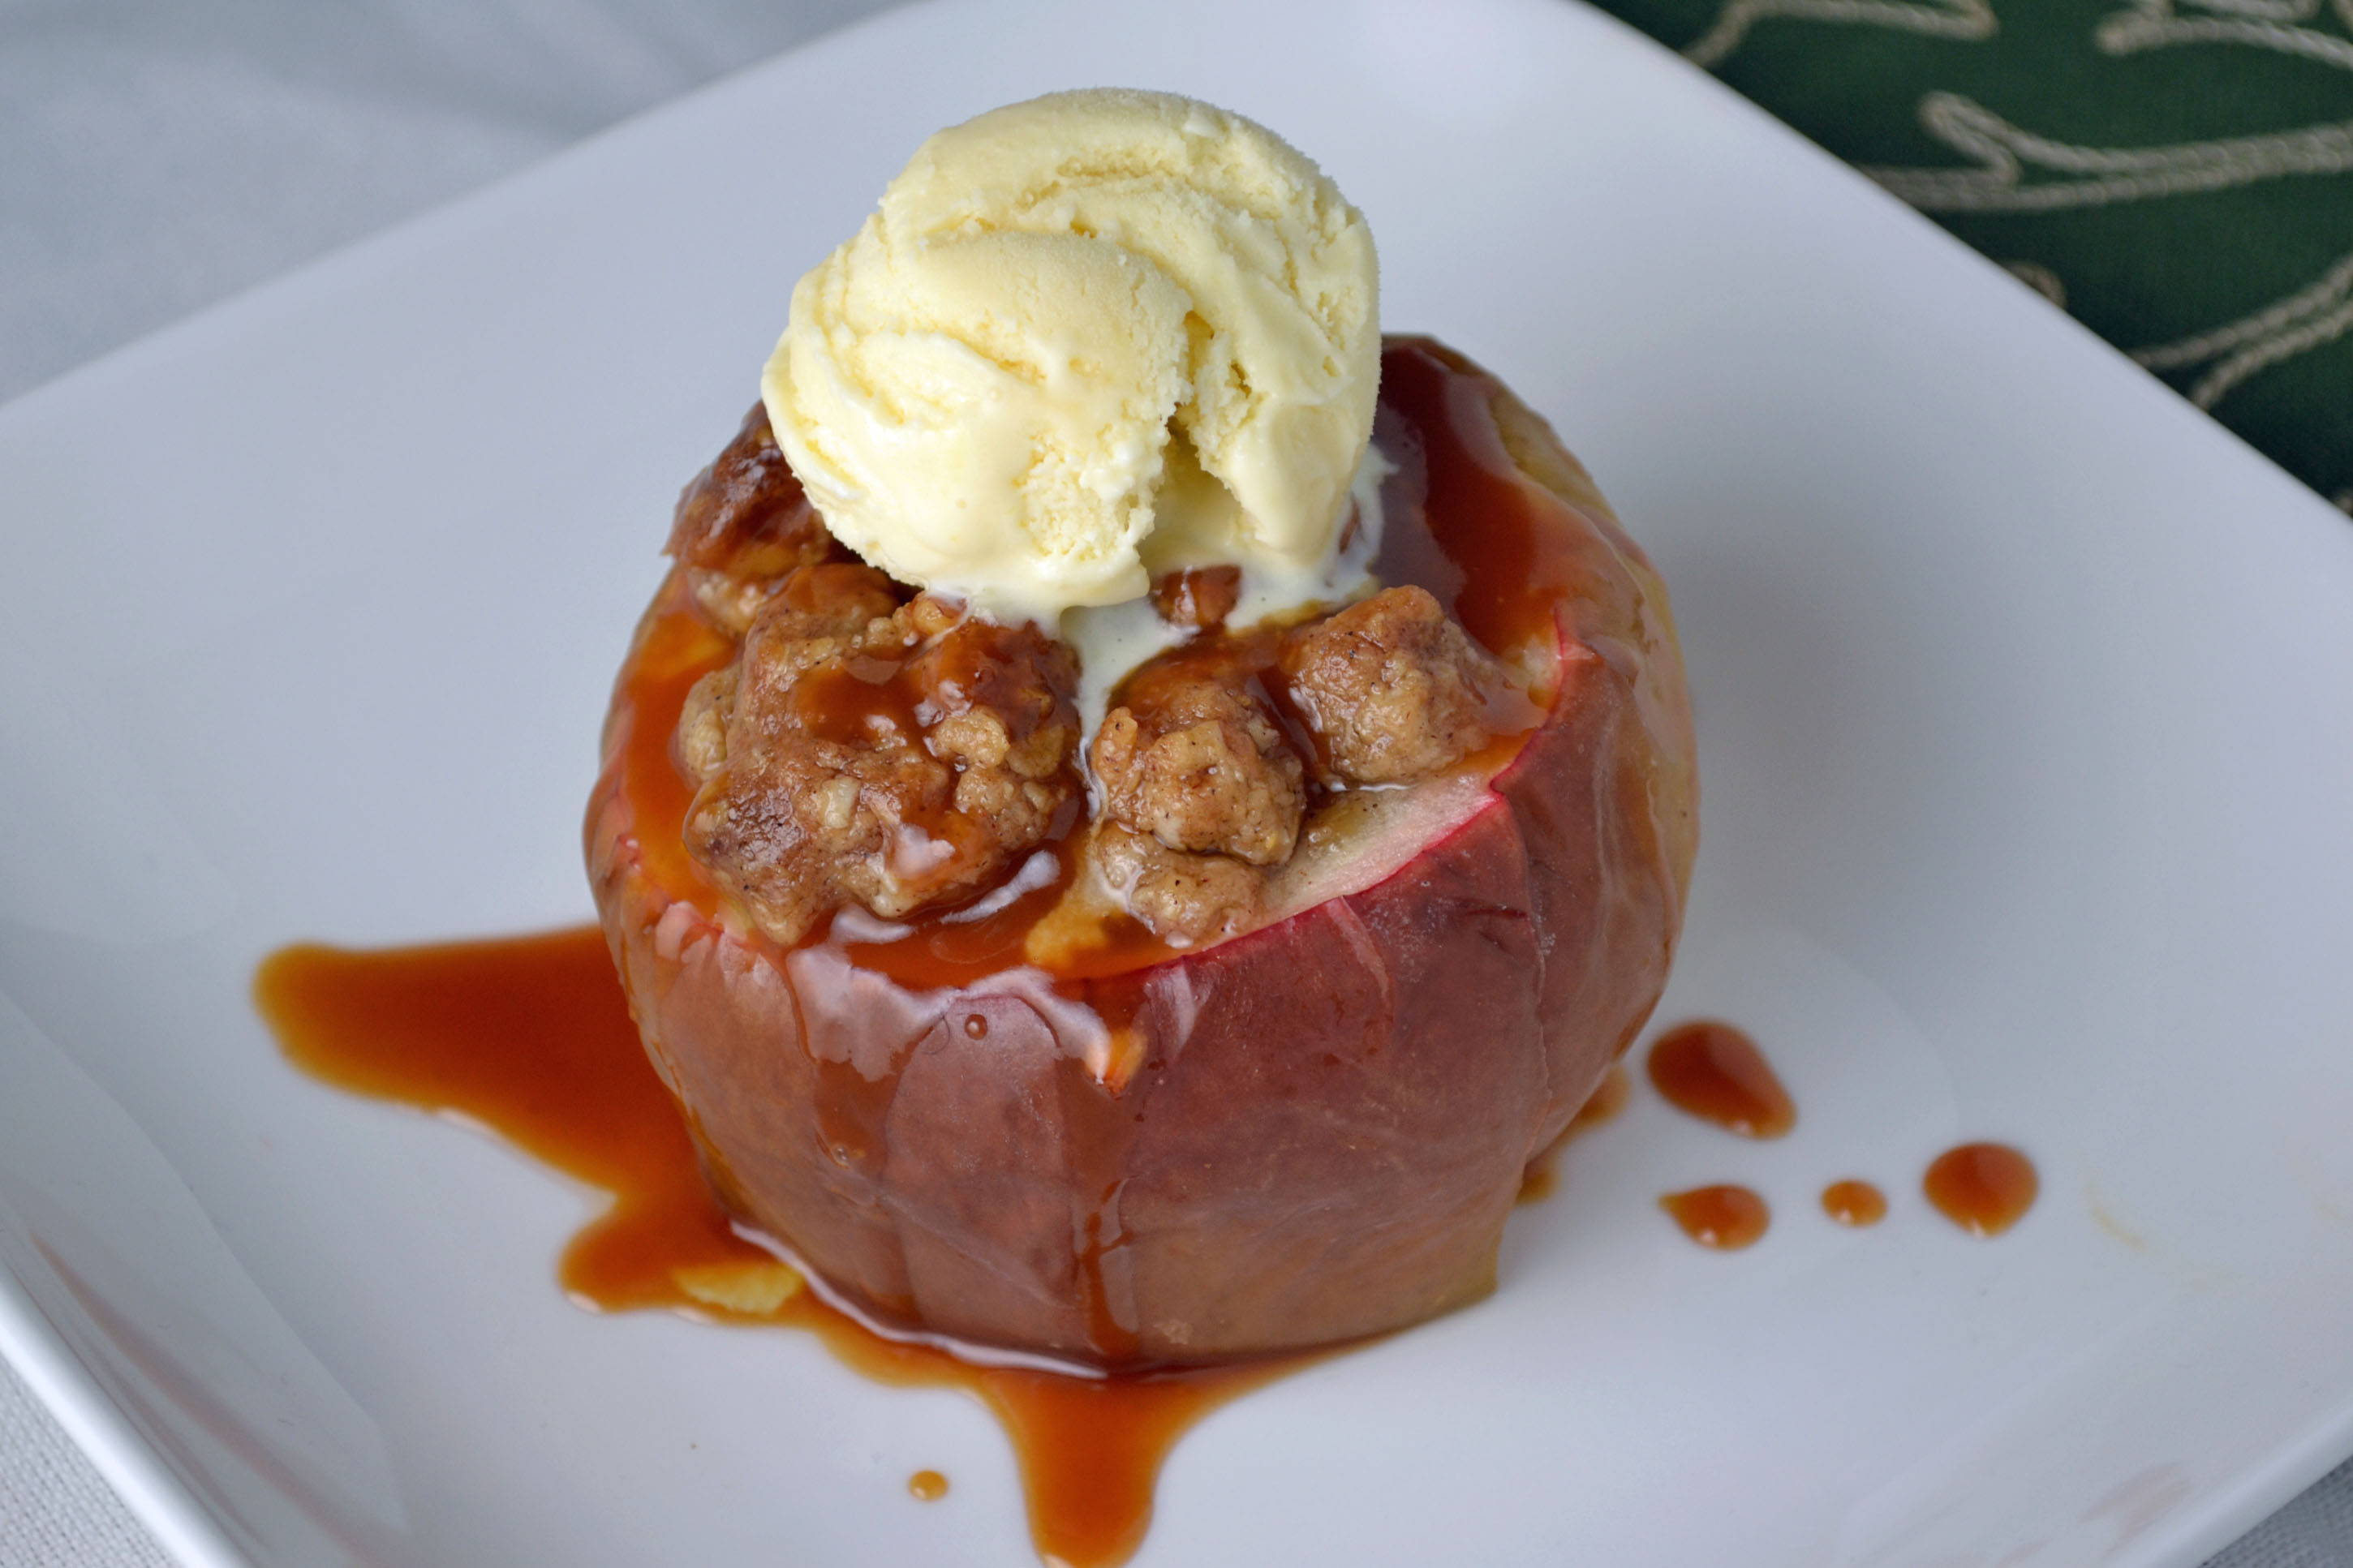 Stuffed Baked Apples with Homemade Caramel Sauce